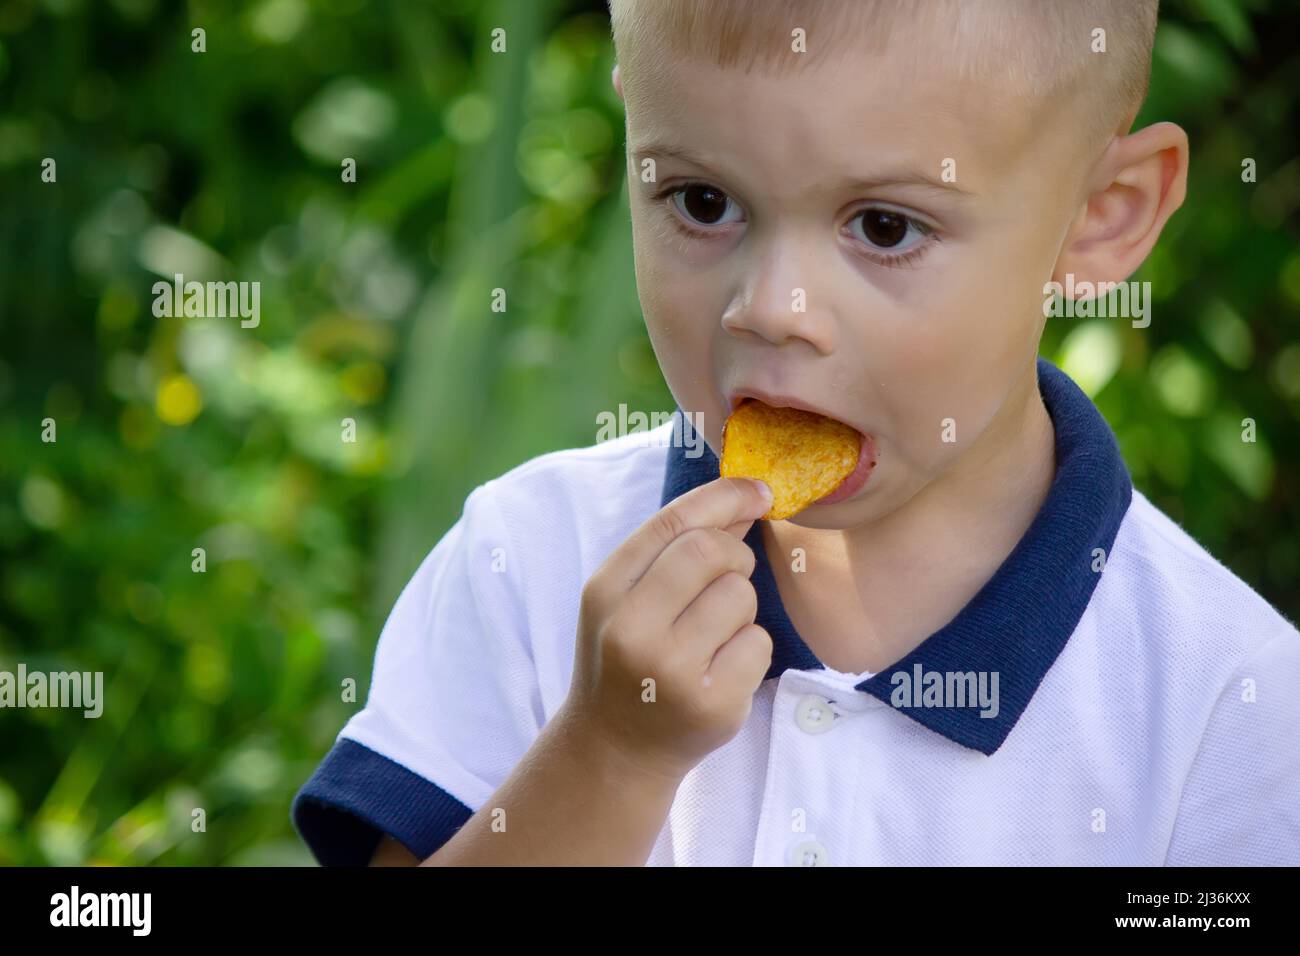 potato chips in the boy's hand, the boy eats the chips. selective focus Stock Photo